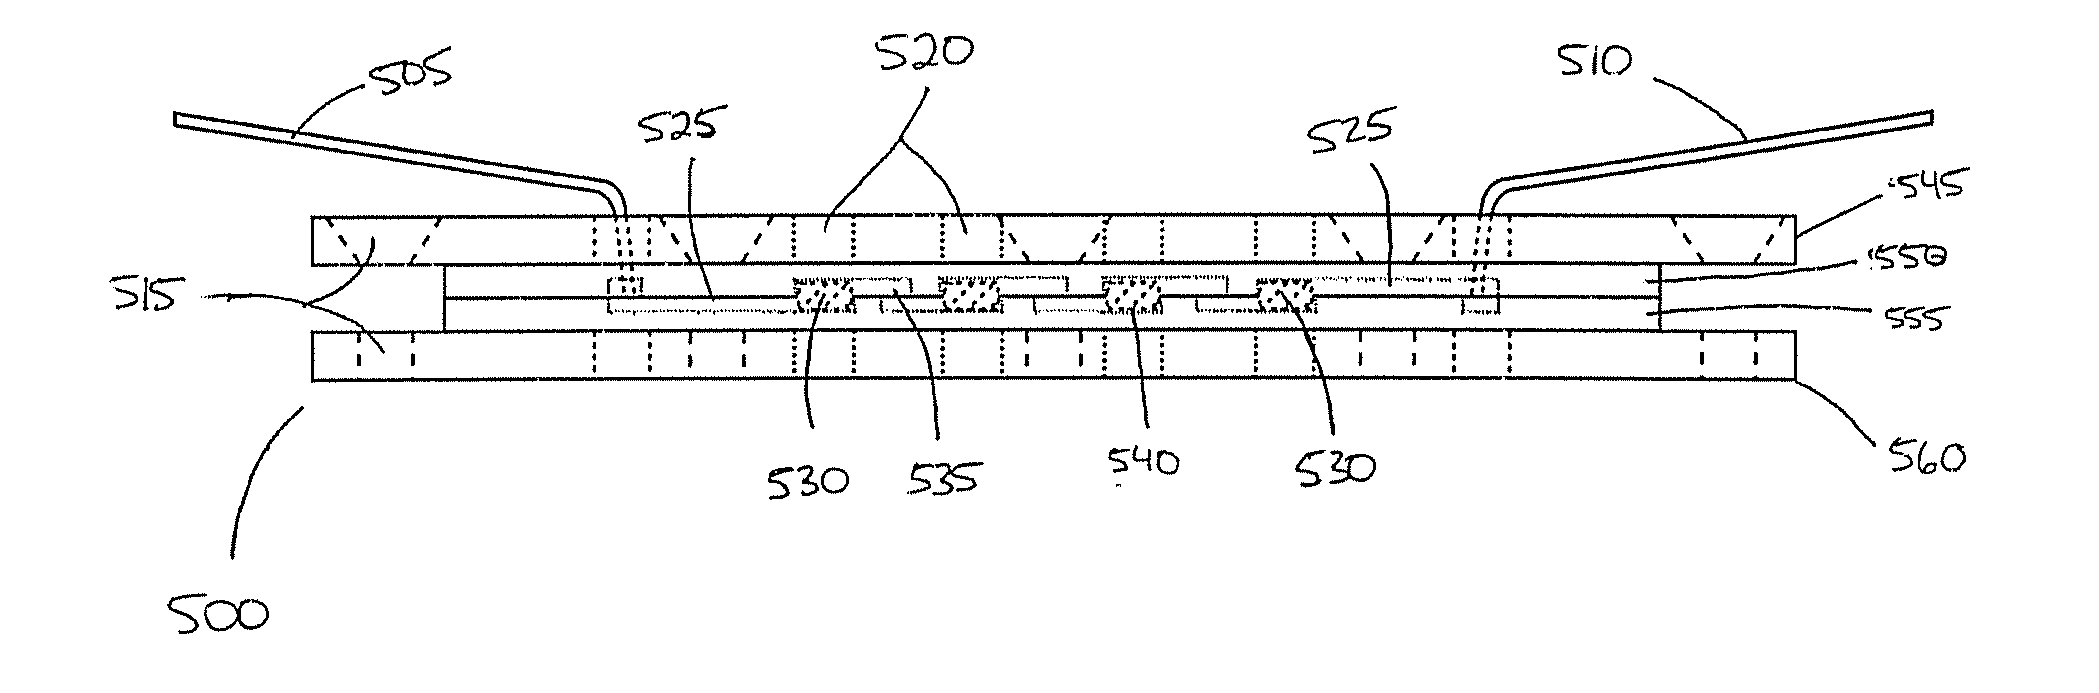 Materials and methods for cell-based assays